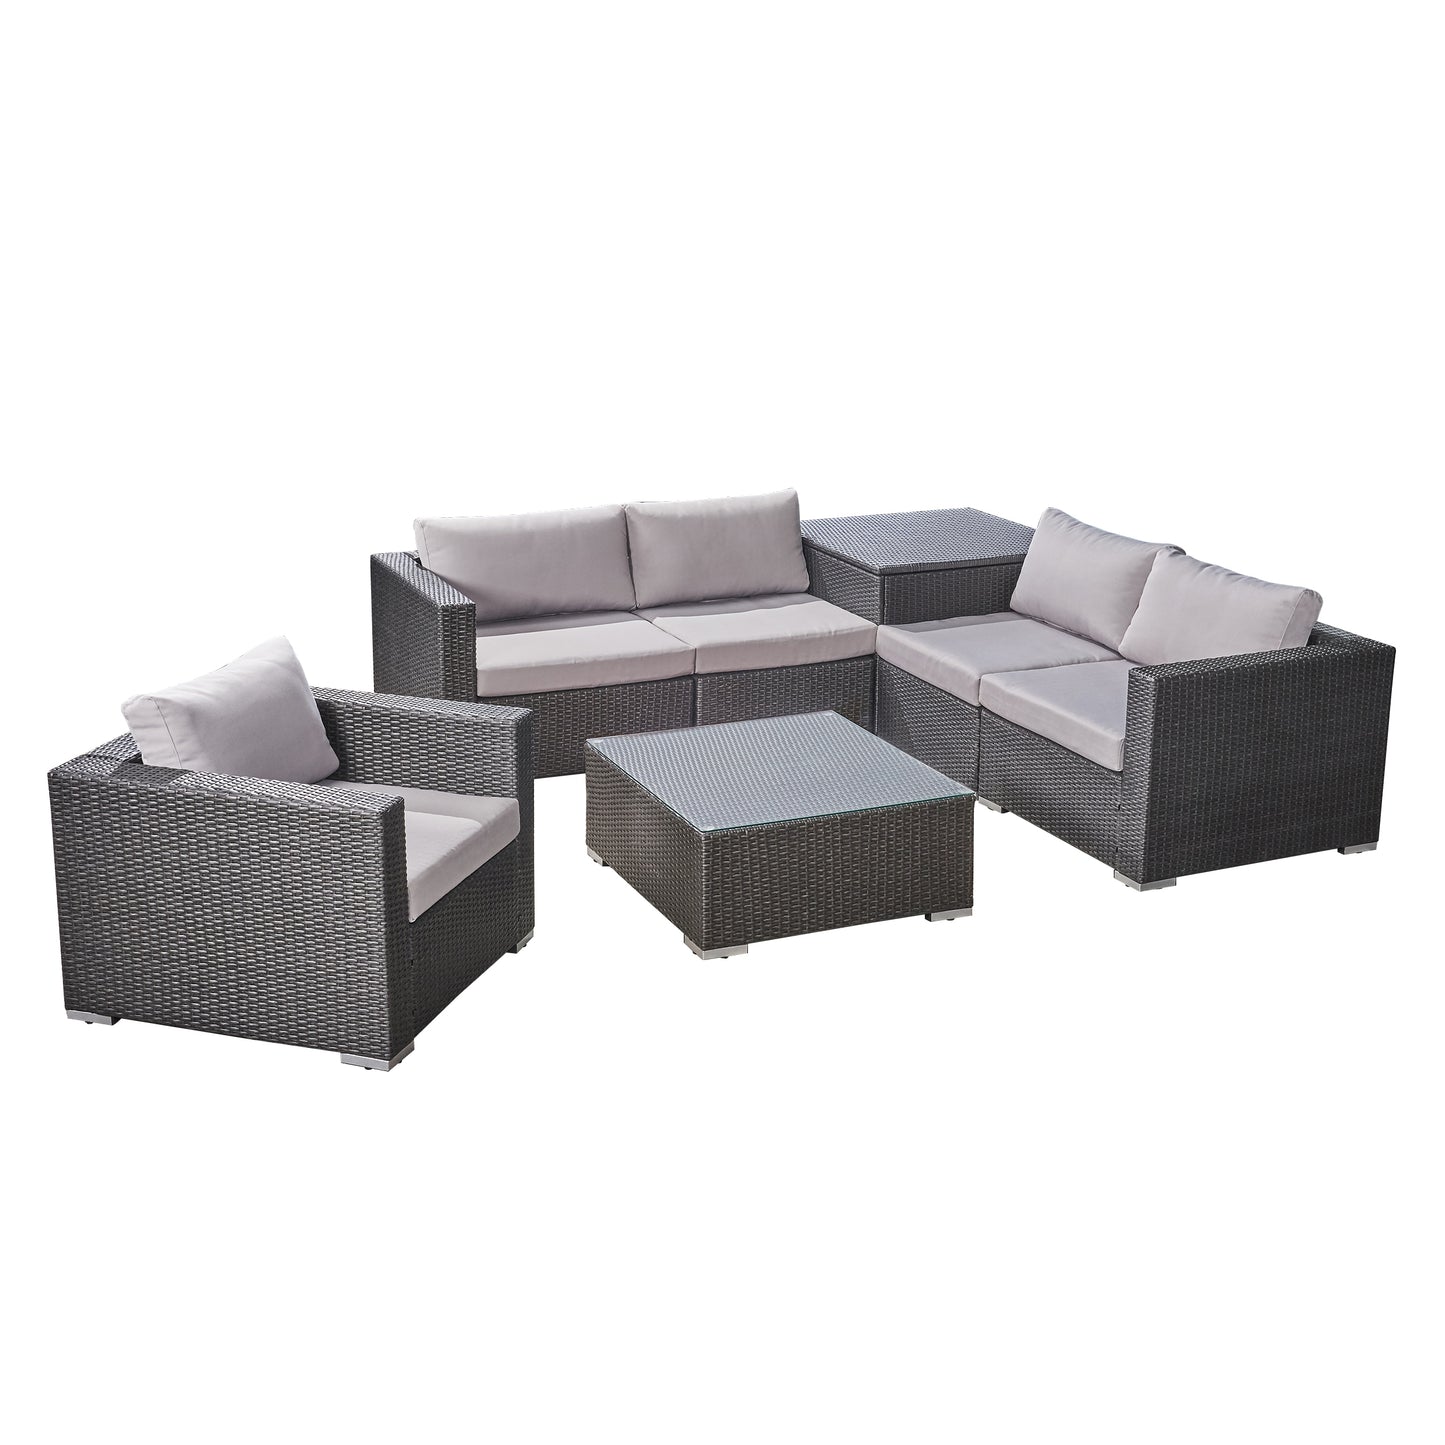 Valentina Outdoor 5-Seater Sectional Sofa Set with Club Chair and Storage Ottoman